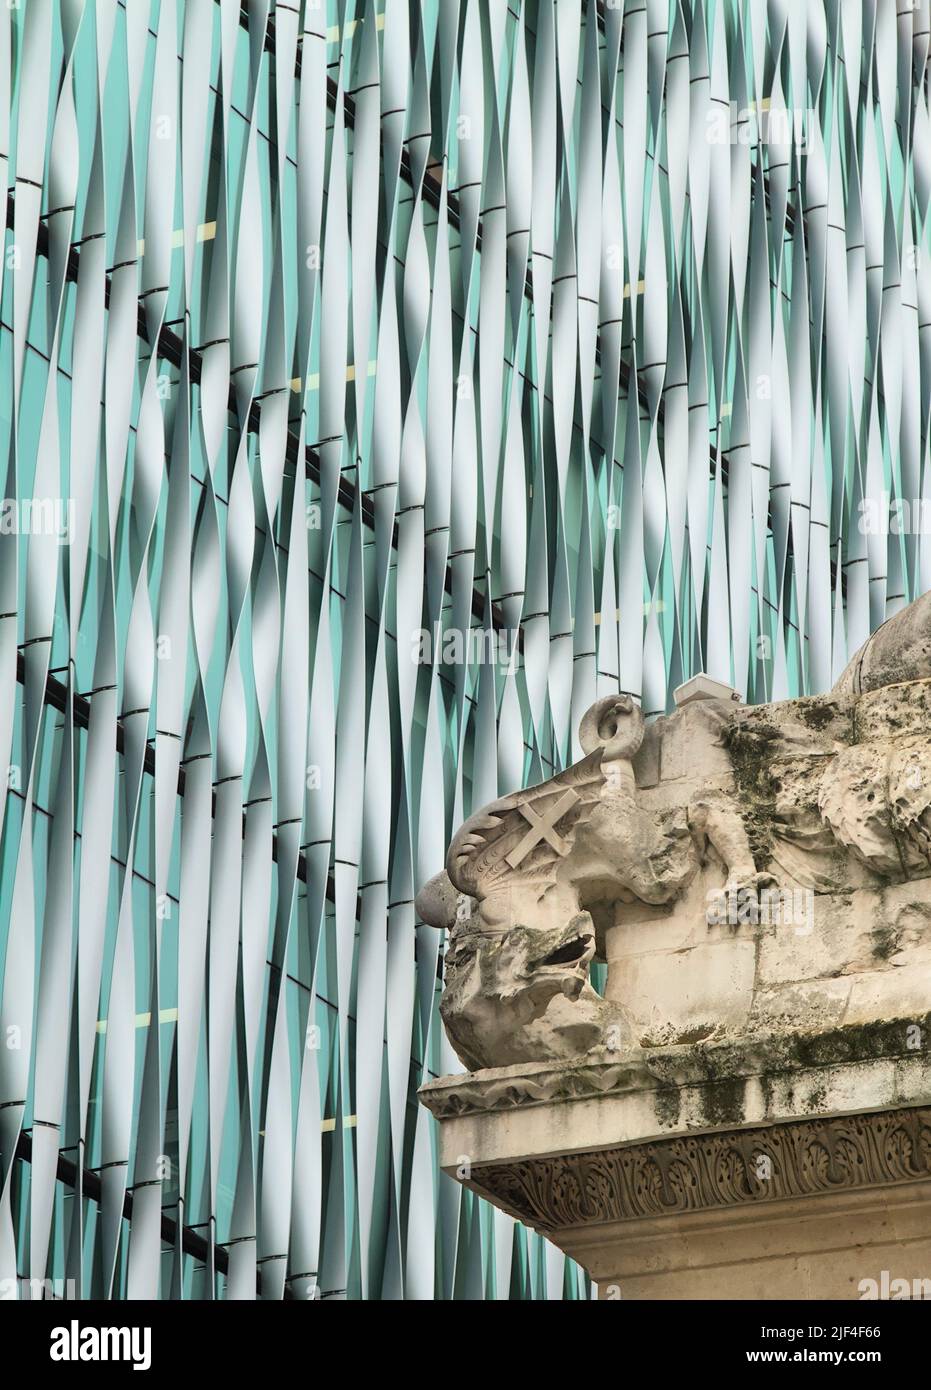 Old And New Contrast Of Part Of The Monument To The Great Fire Of London And The Front Of A Modern Office Building, London UK Stock Photo